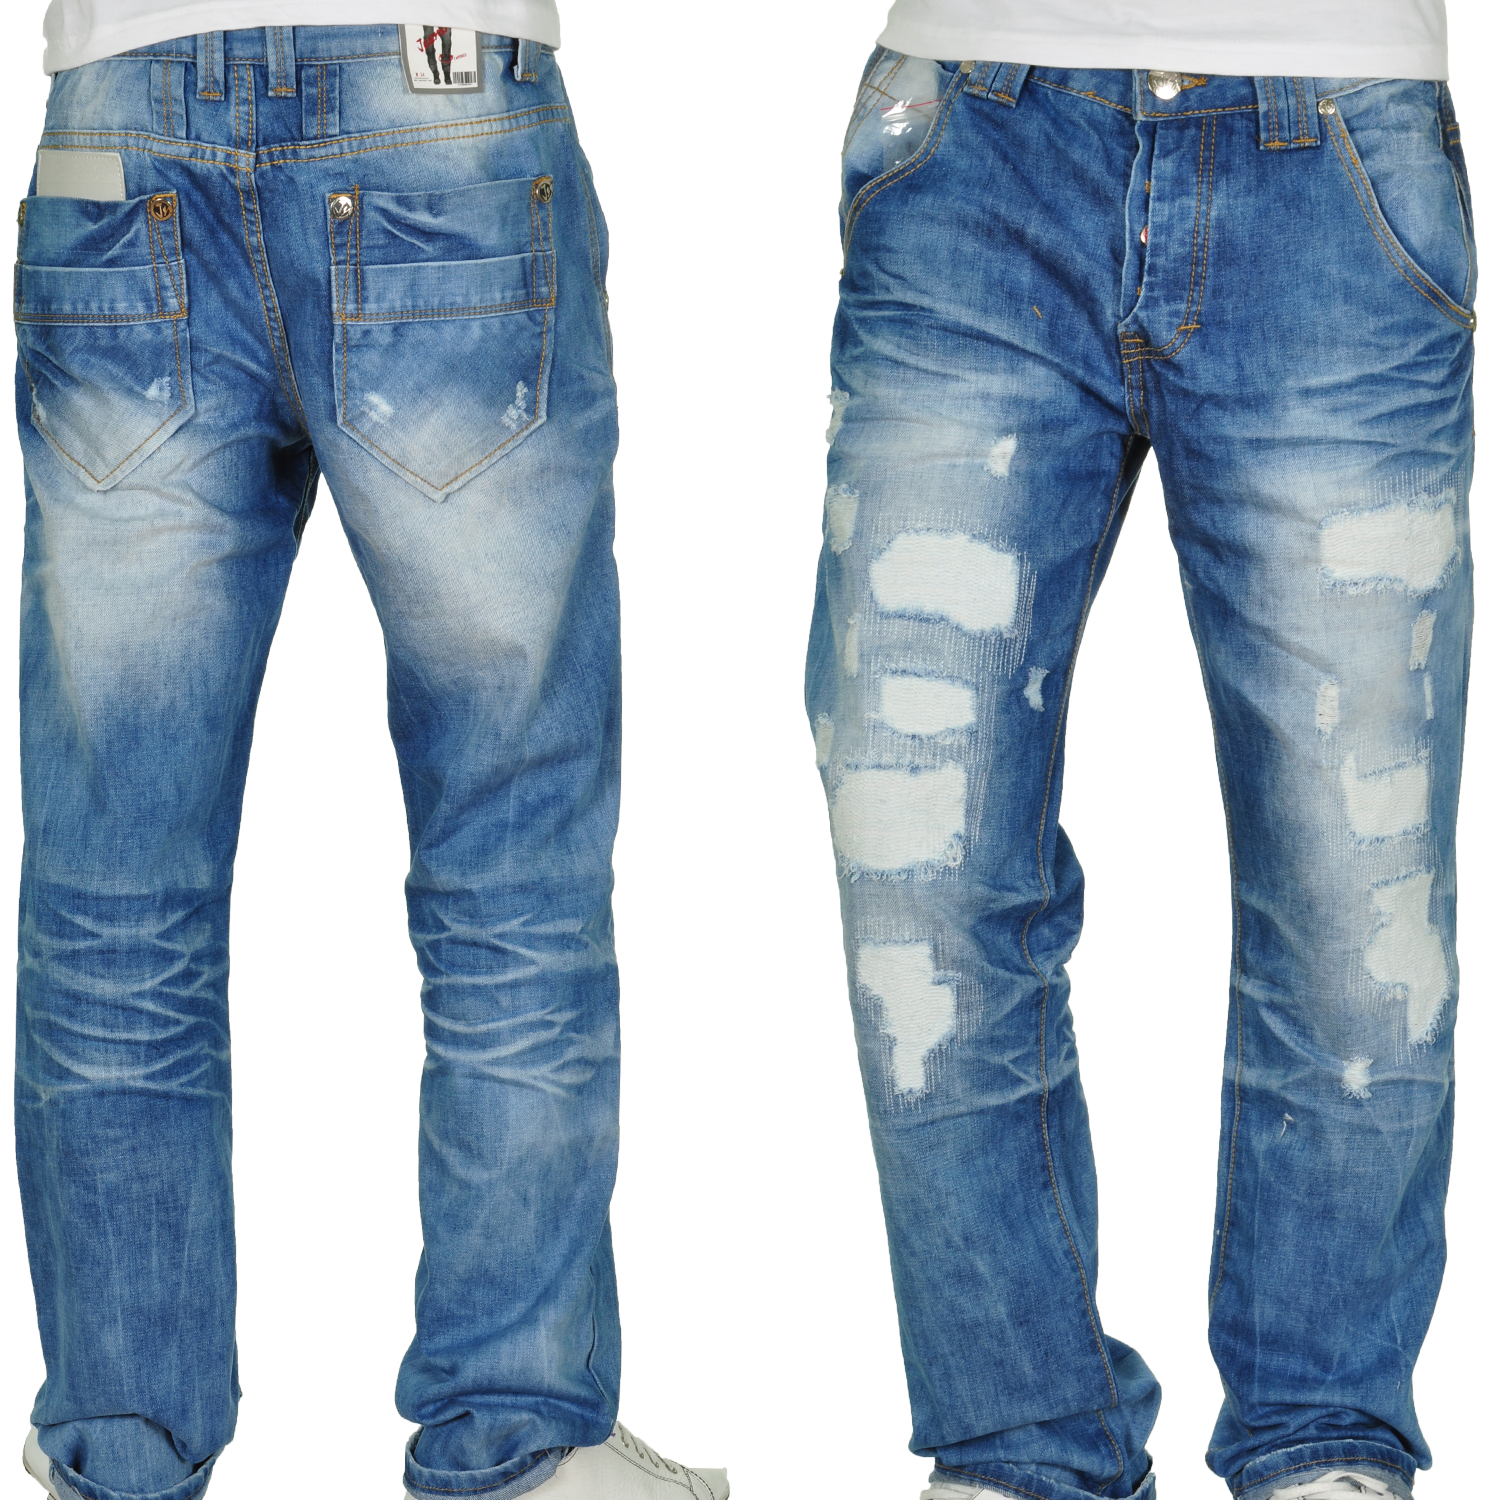 Foto Milano Style Jeansnet Comfort Fit Jeans Azul